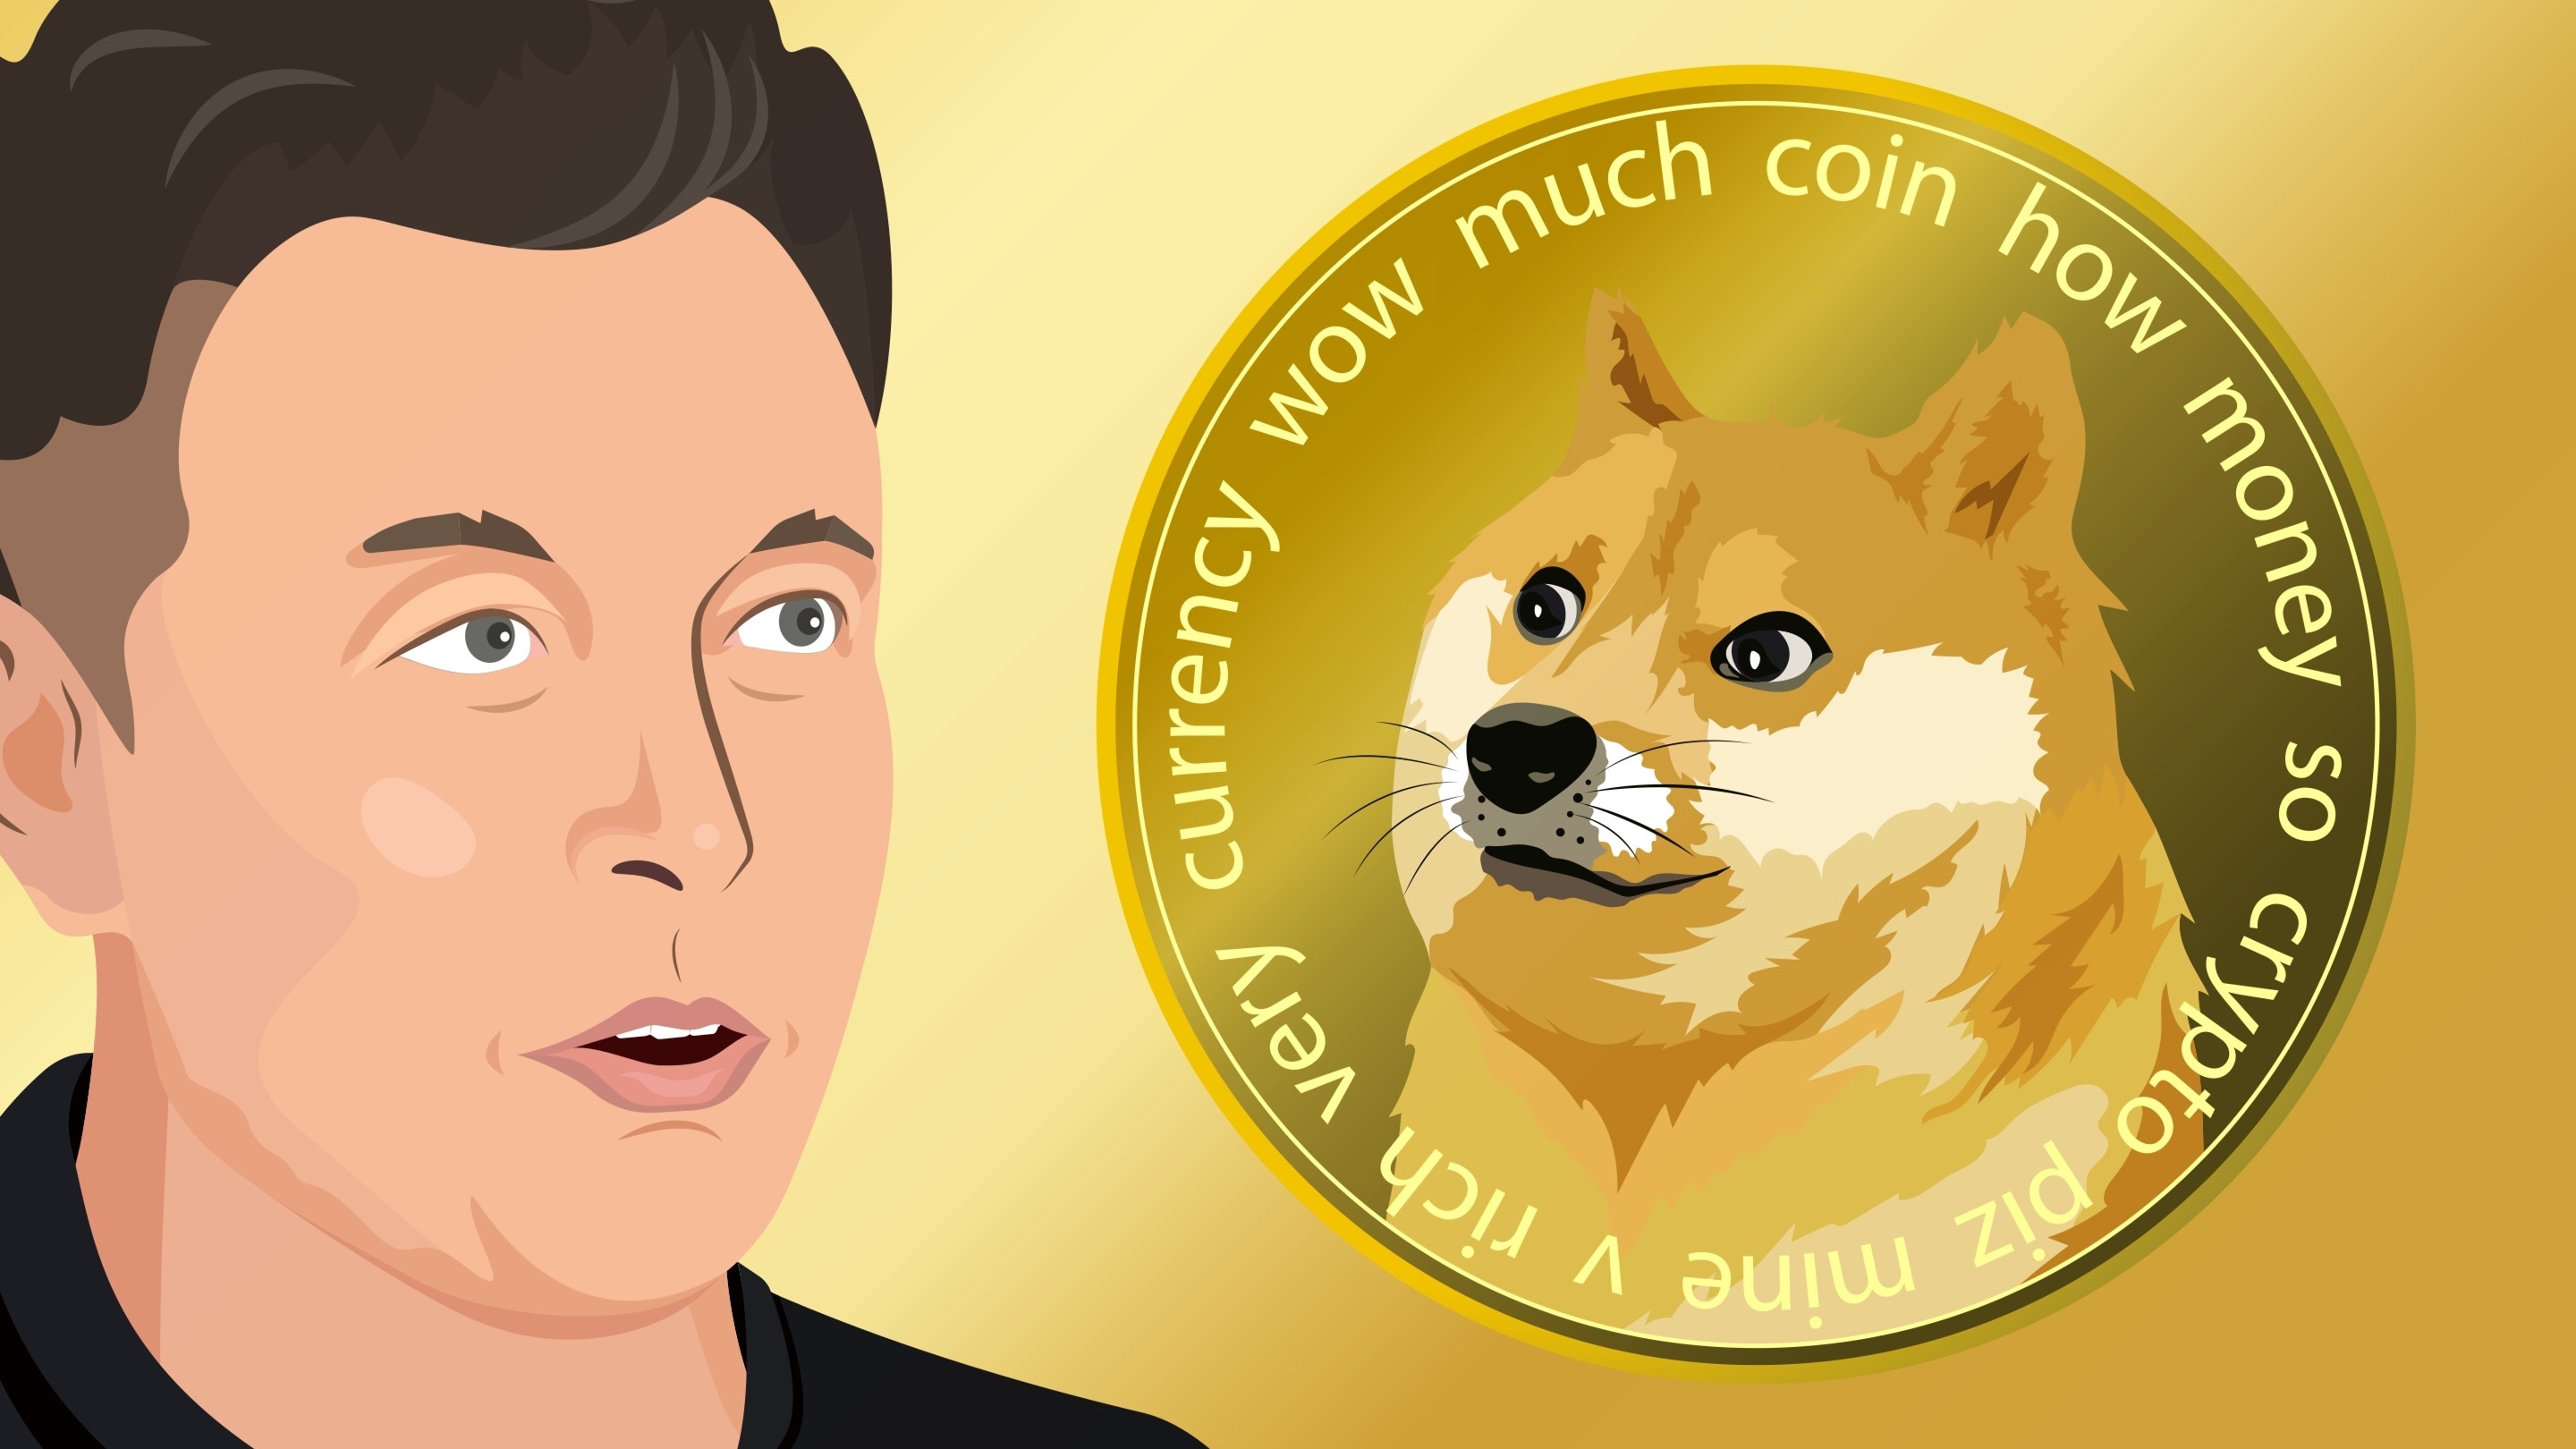 Elon Musk's Dogecoin Boost Caused 380% Daily Spike In Memecoin Traders, Says Report